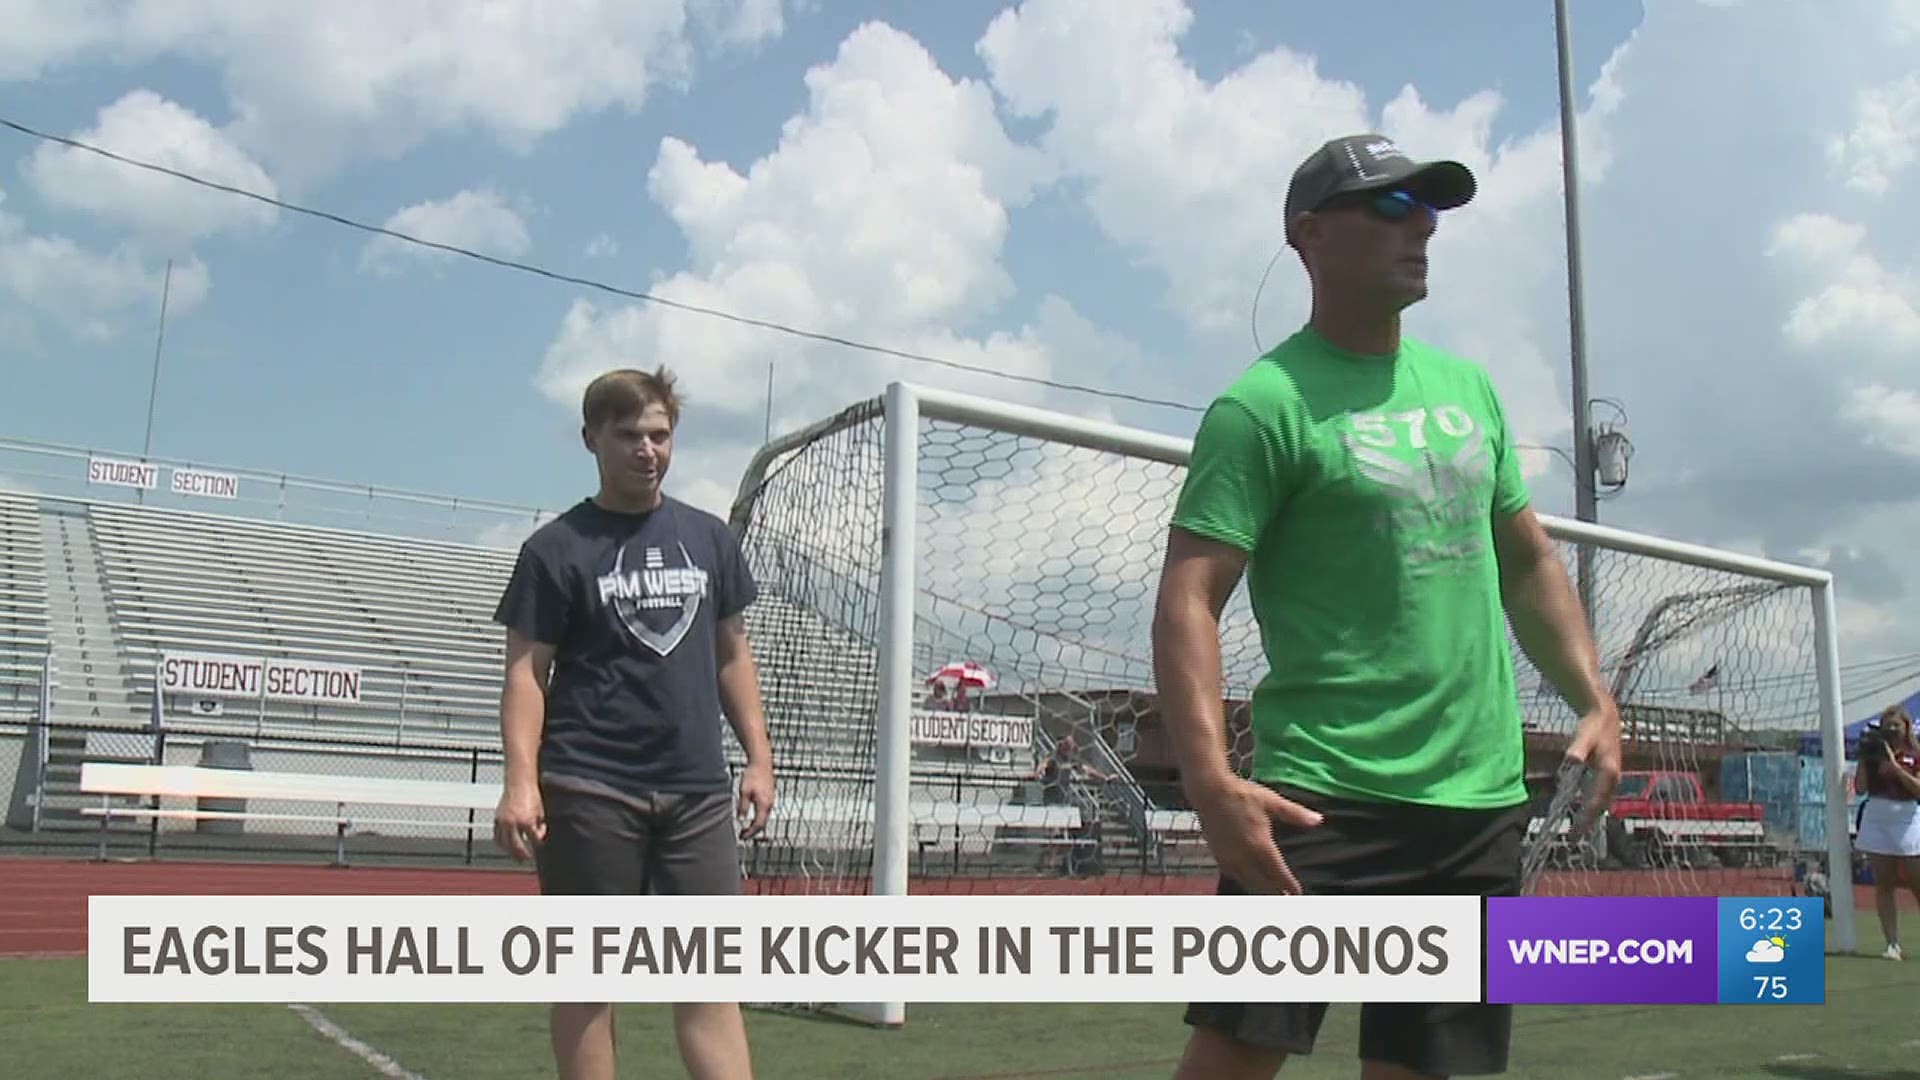 Philadelphia Eagles' leading scorer David Akers was teaching high school players all of the tricks of the trade at a camp in Stroudsburg.